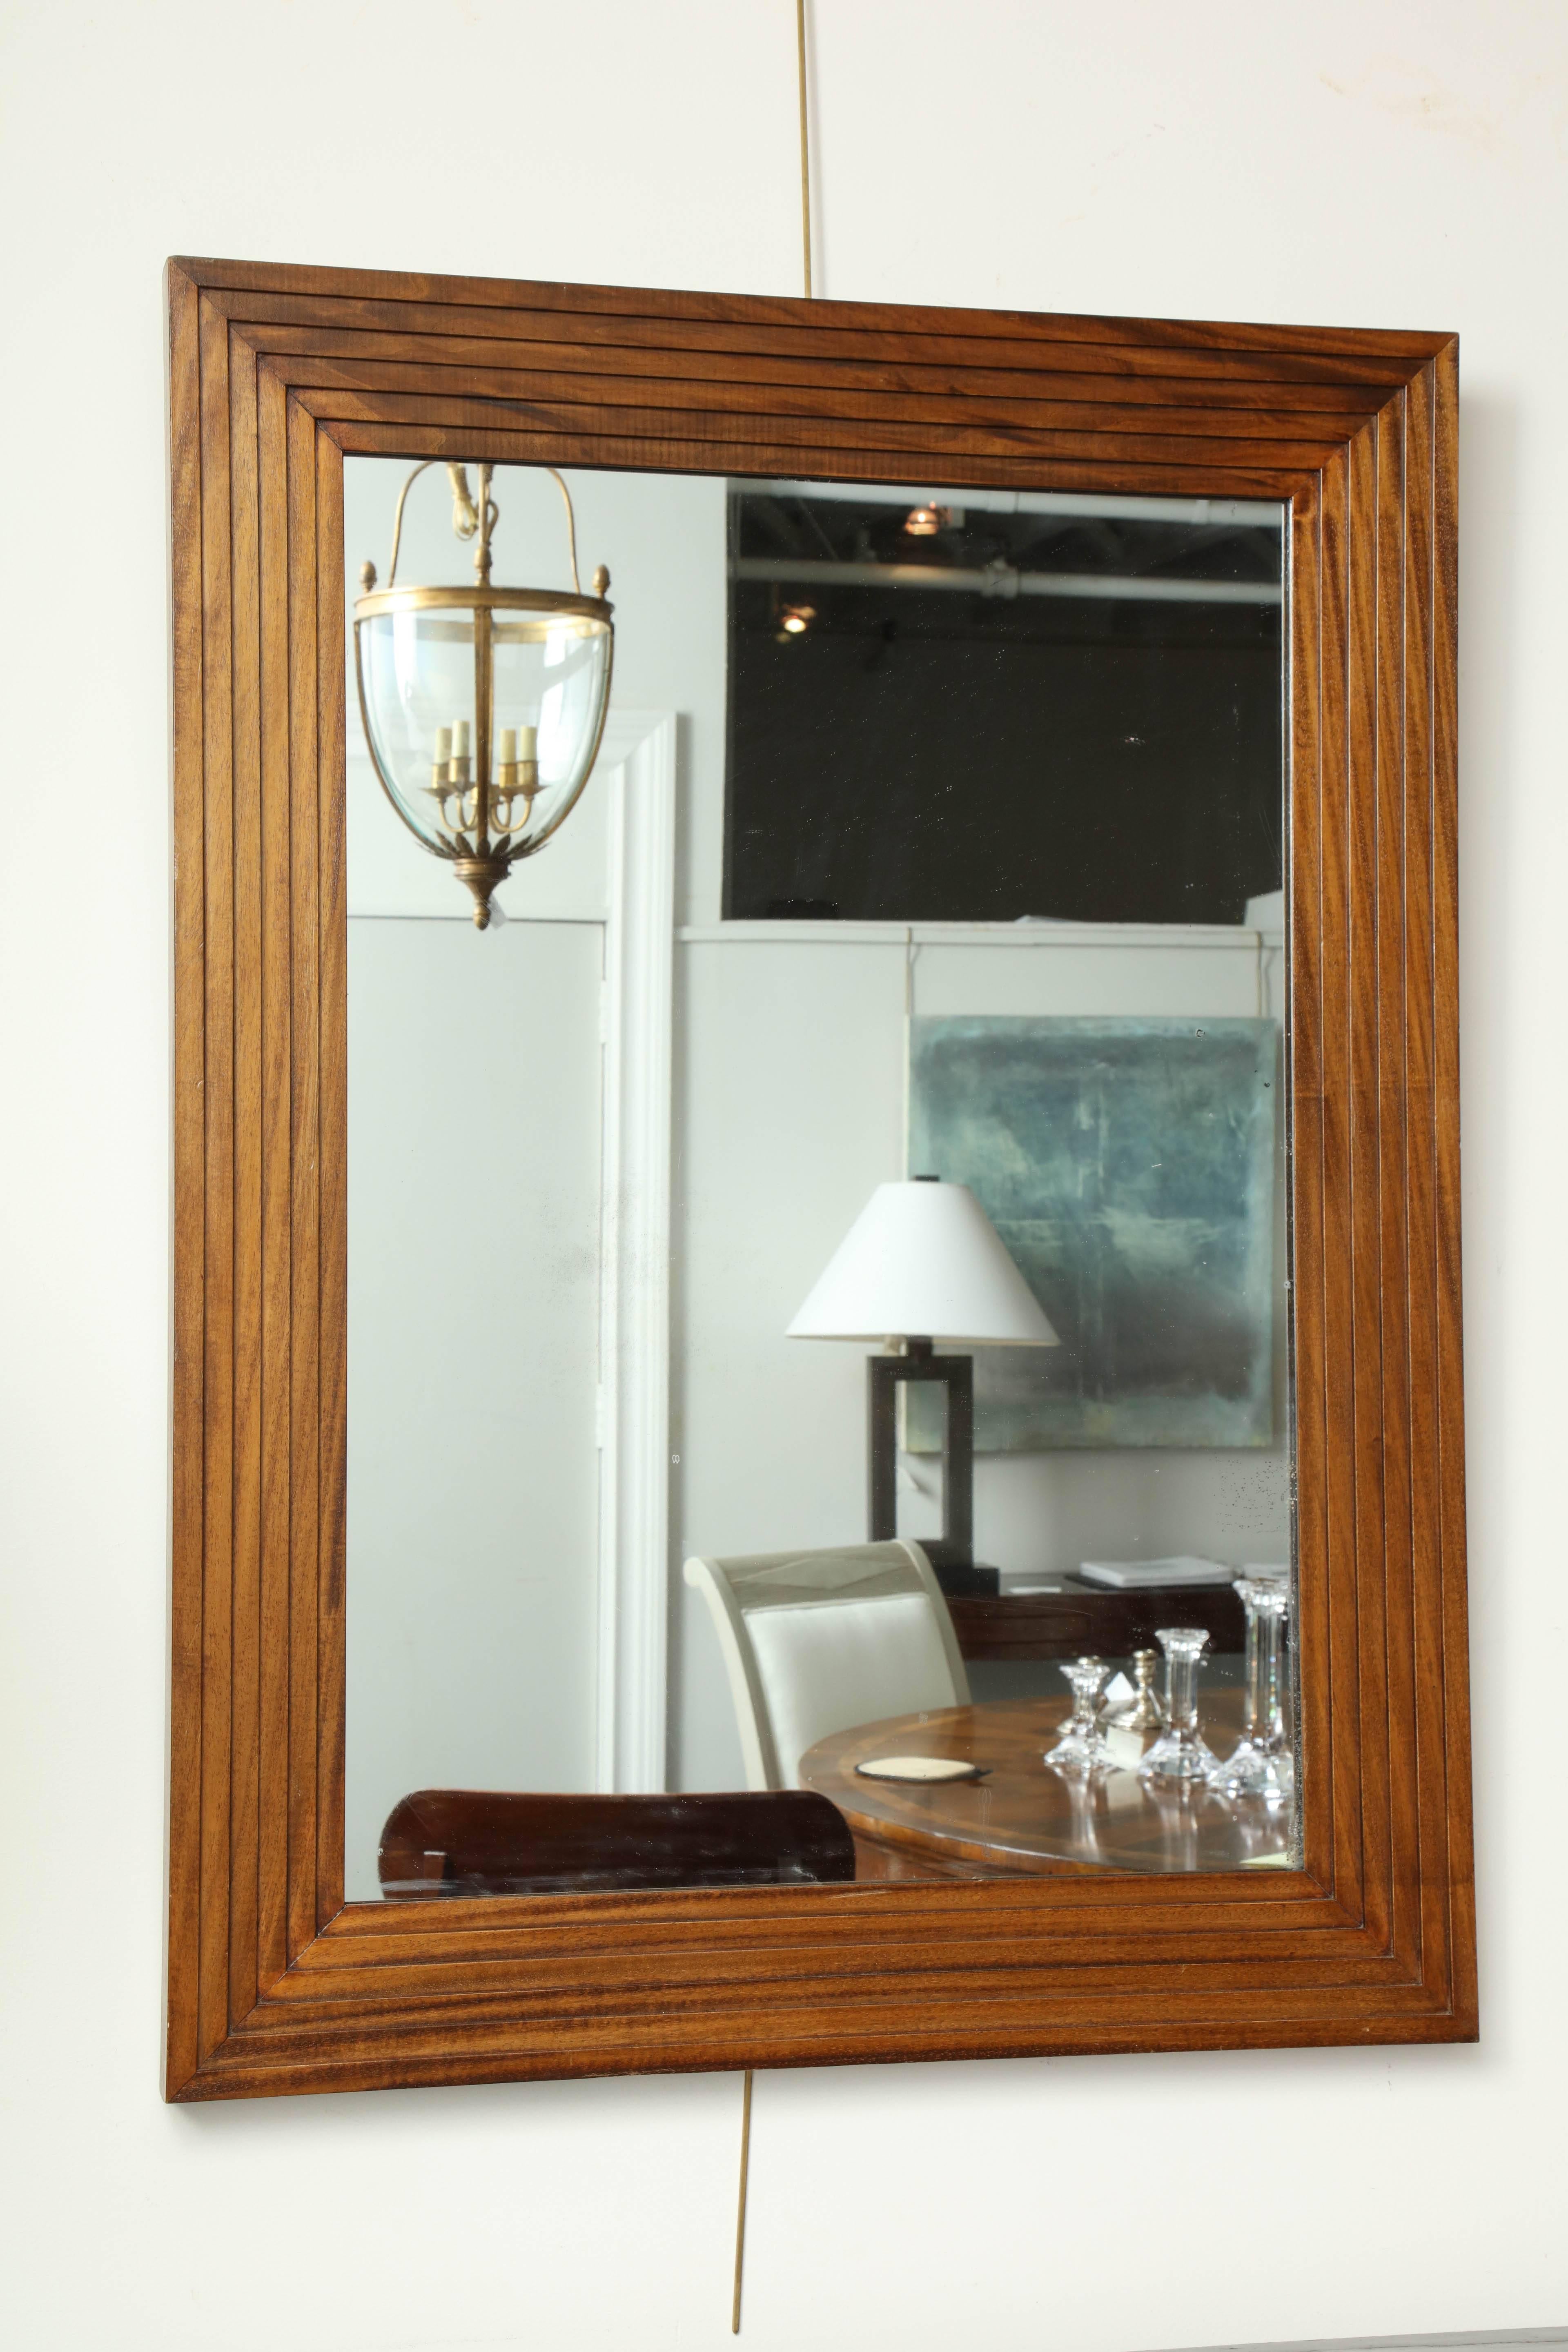 Mid-20th century mahogany mirror rectangular plate within stepped borders.